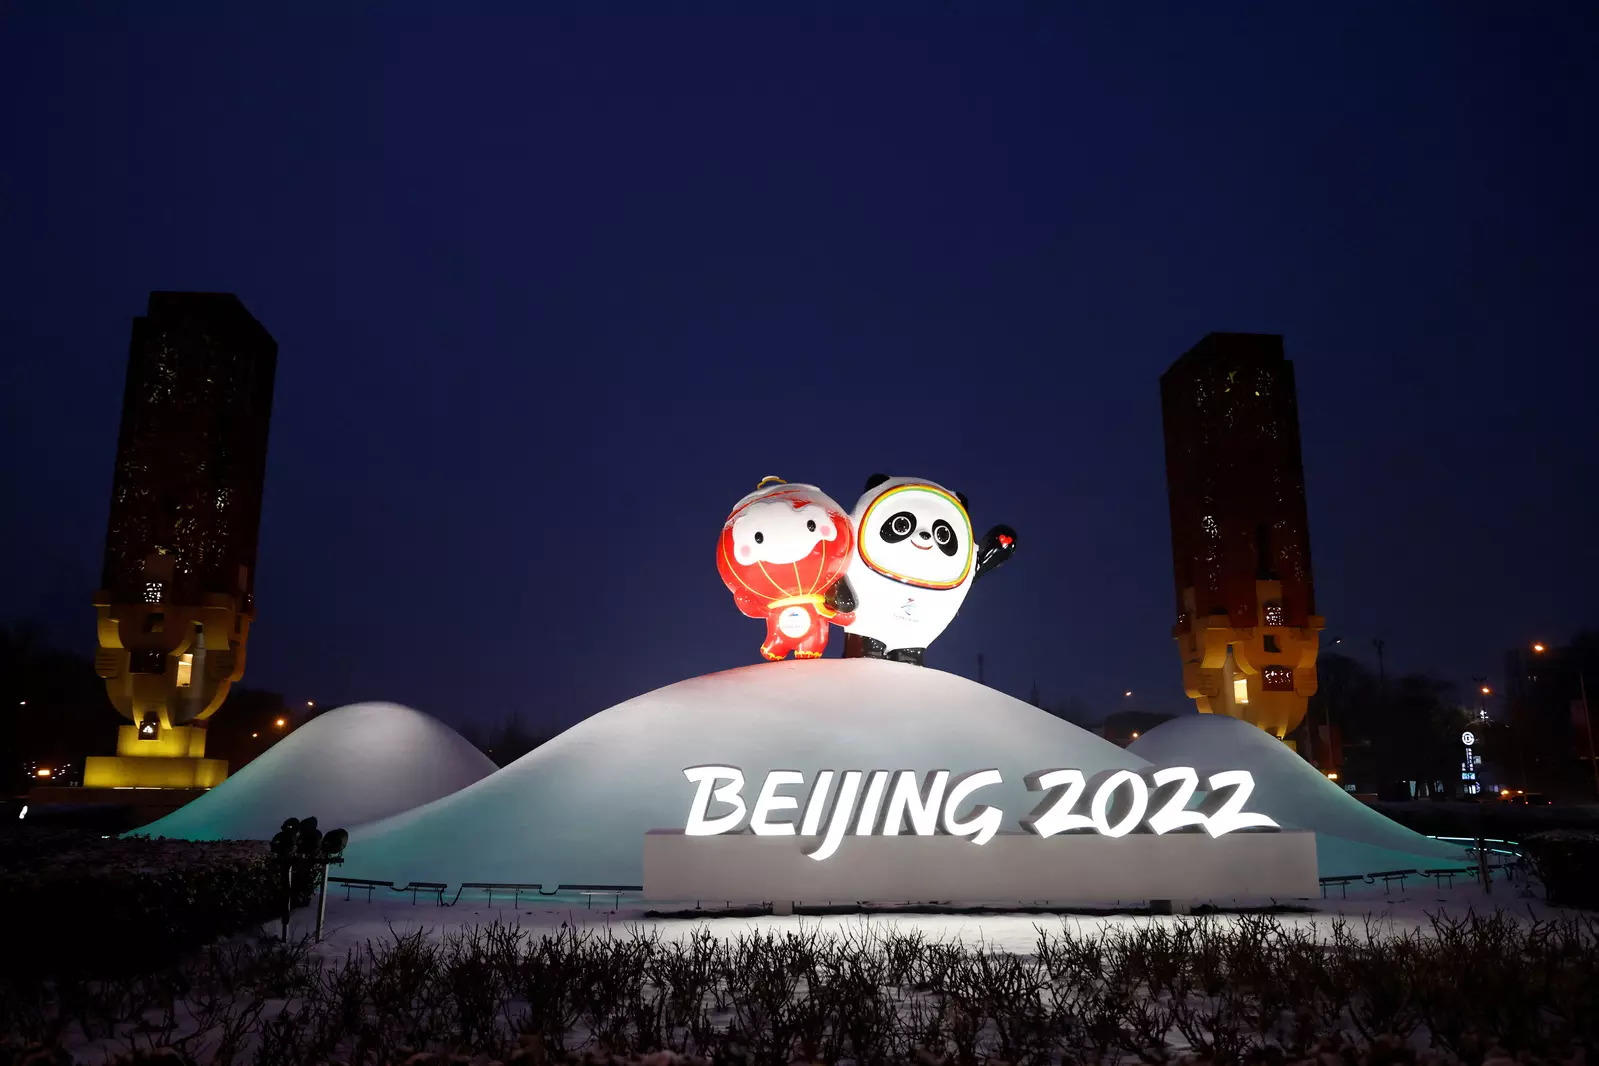   An installation featuring Bing Dwen Dwen and Shuey Rhon Rhon, mascots of the Beijing 2022 Winter Olympics and Paralympics is pictured, in Beijing, China January 22, 2022.